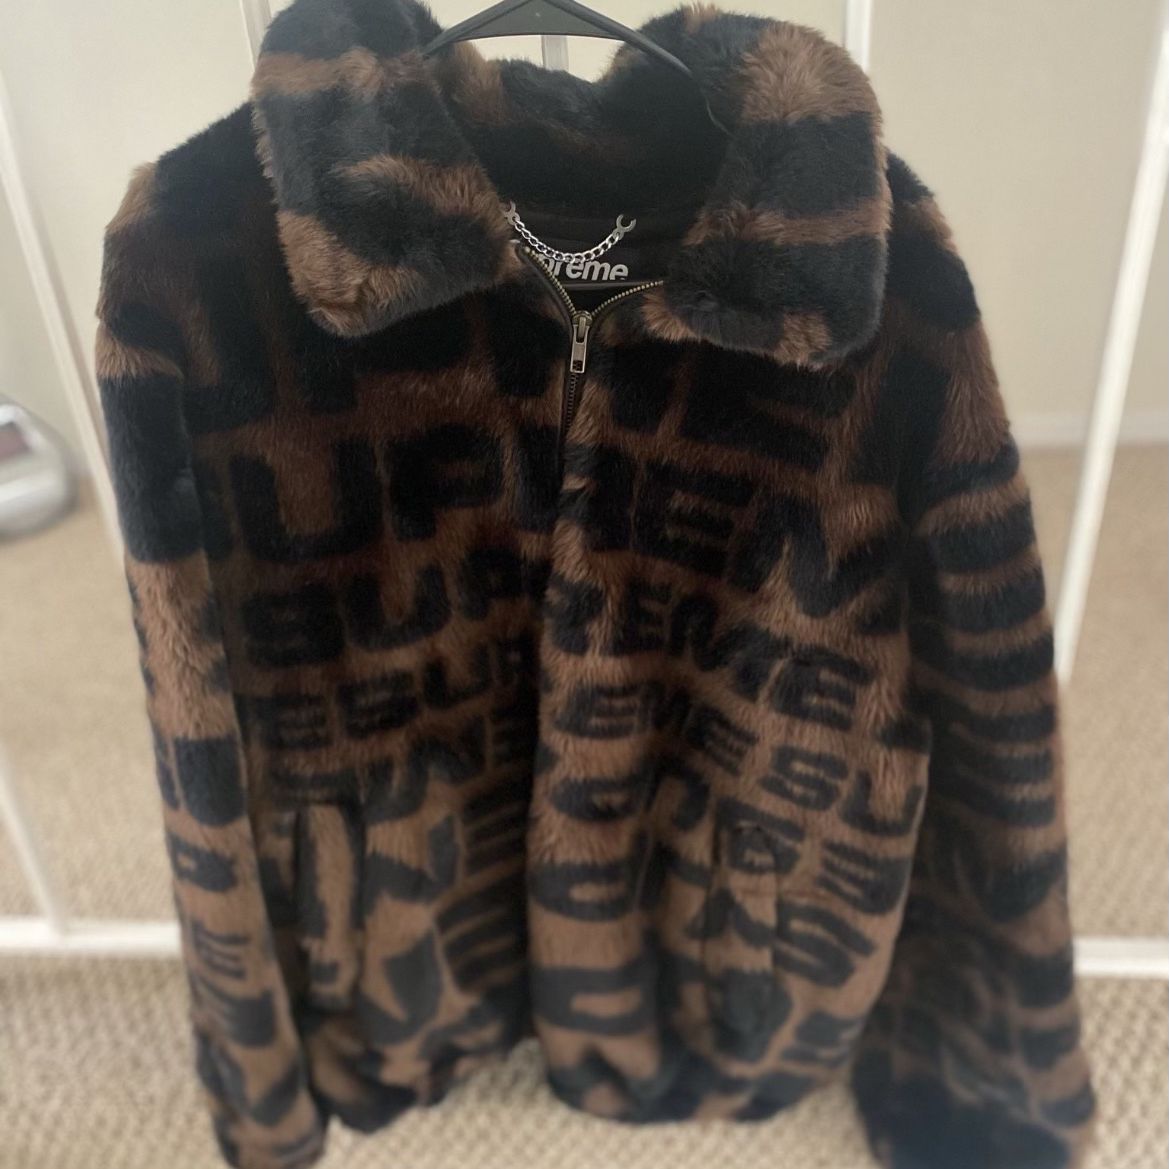 Supreme Faux Fur Repeater Bomber Jacket for Sale in Huntington